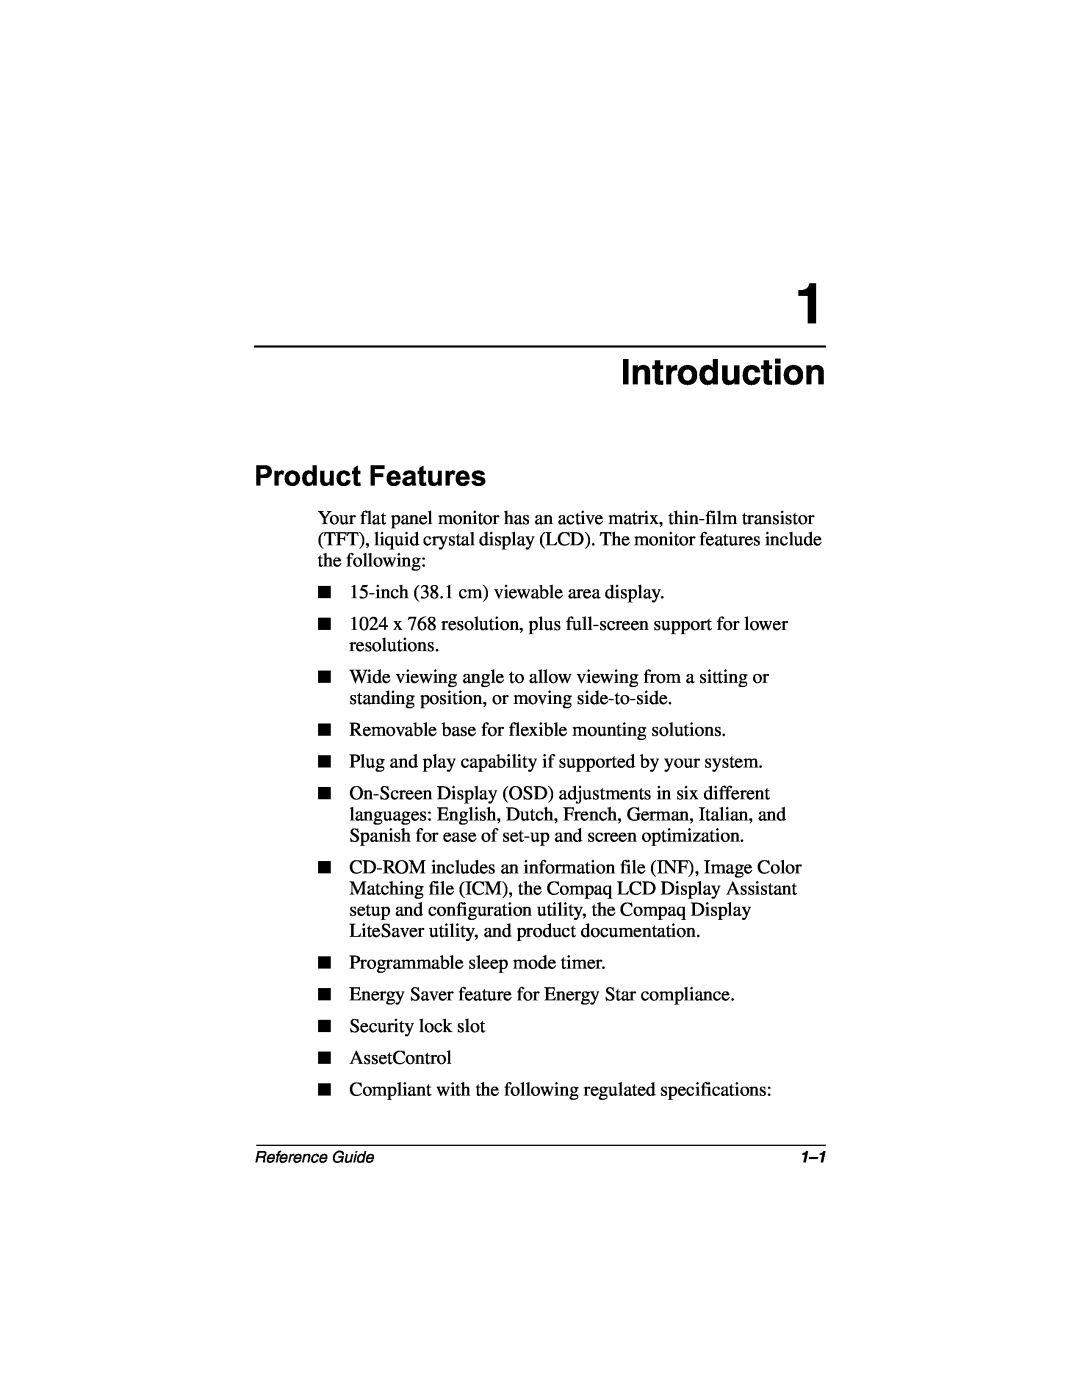 Compaq 5017 manual Introduction, Product Features 